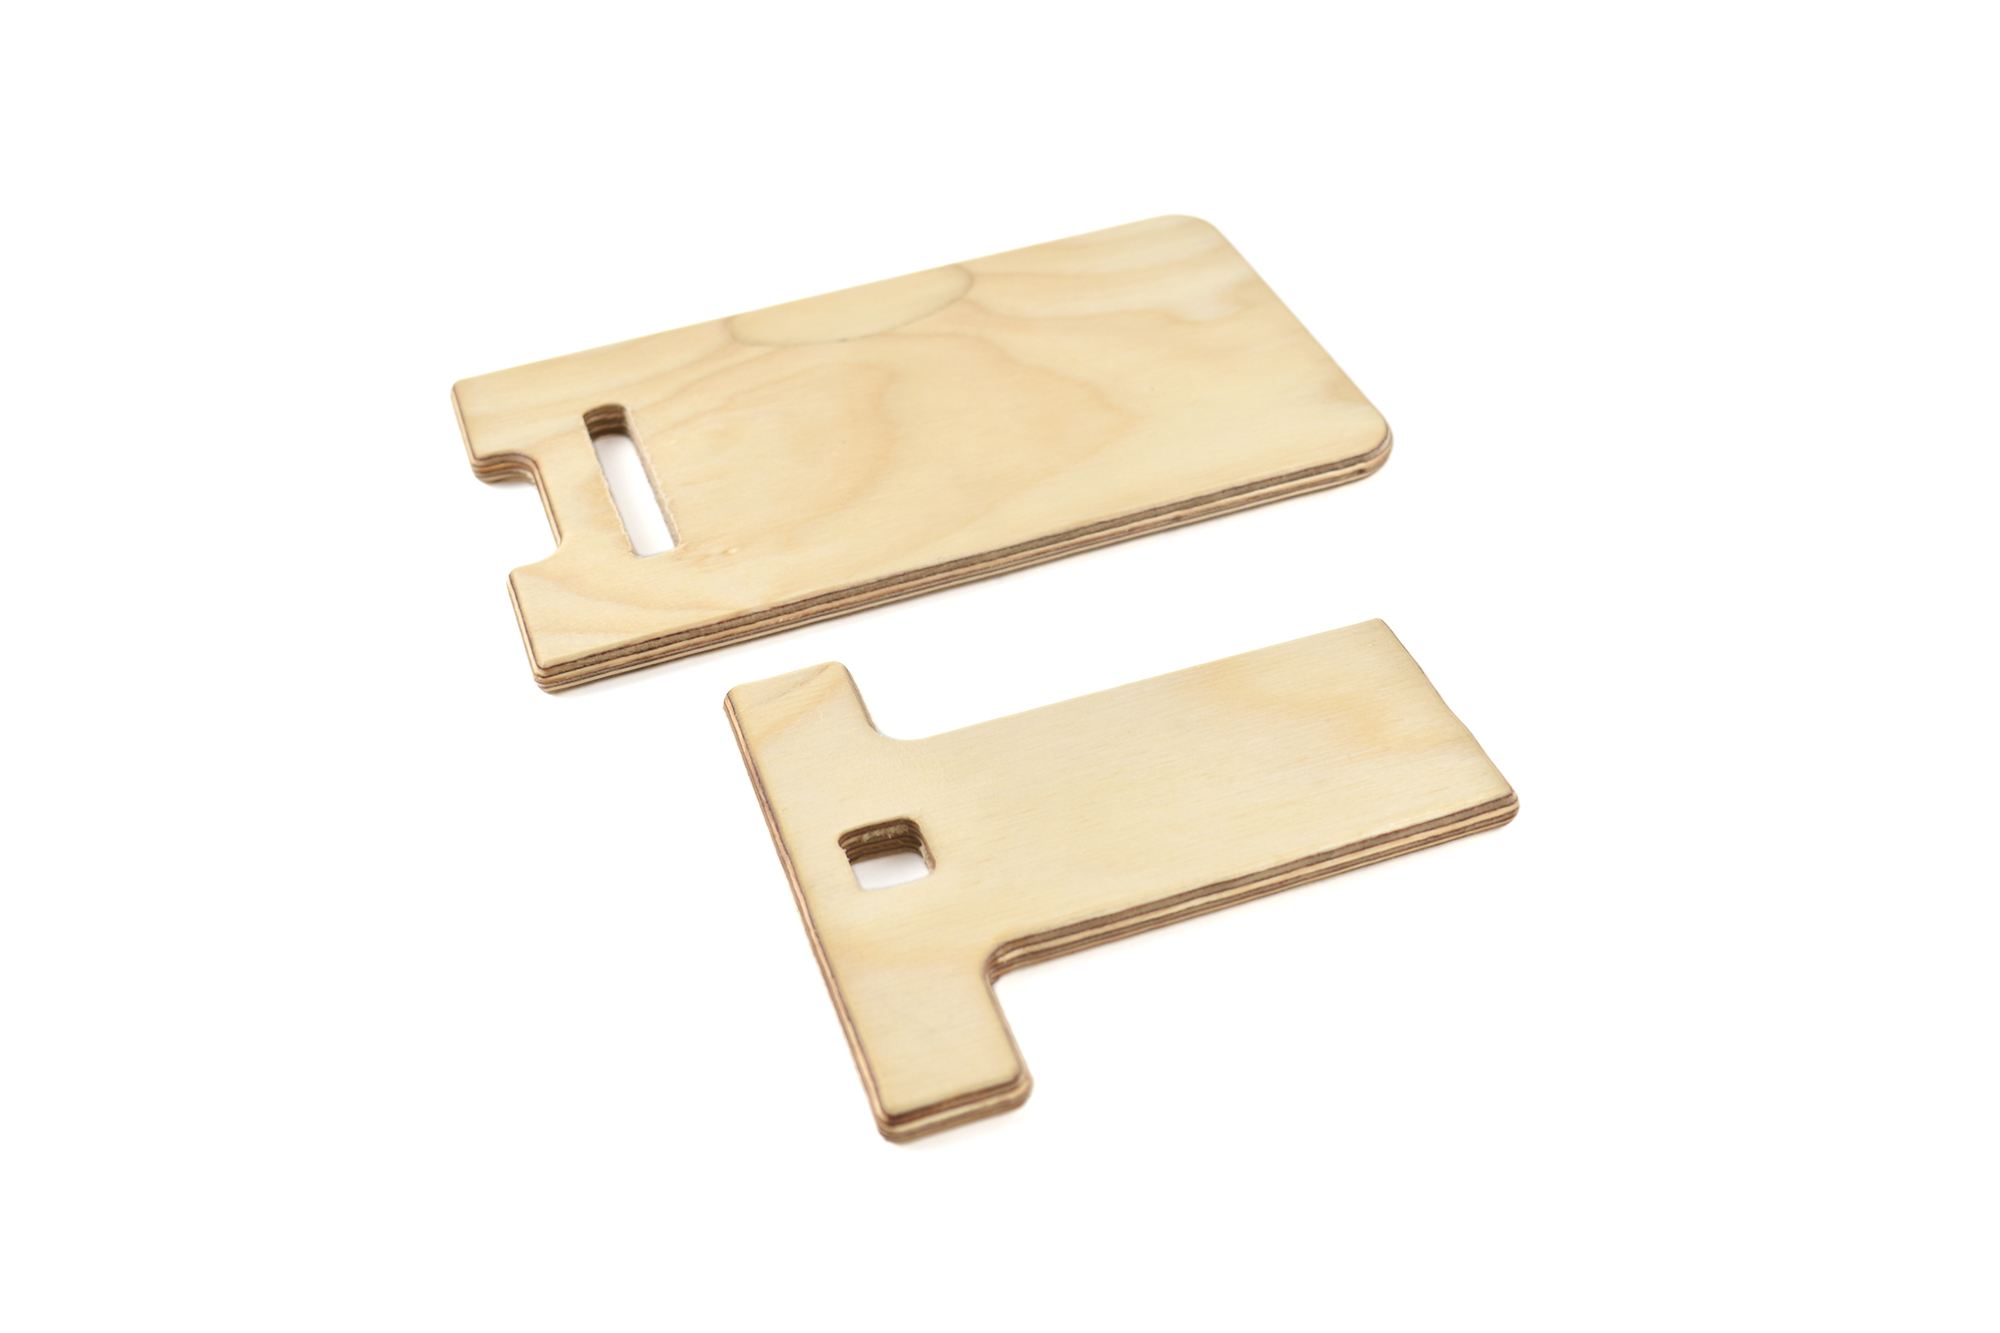 Russian Birch Mobile phone stand